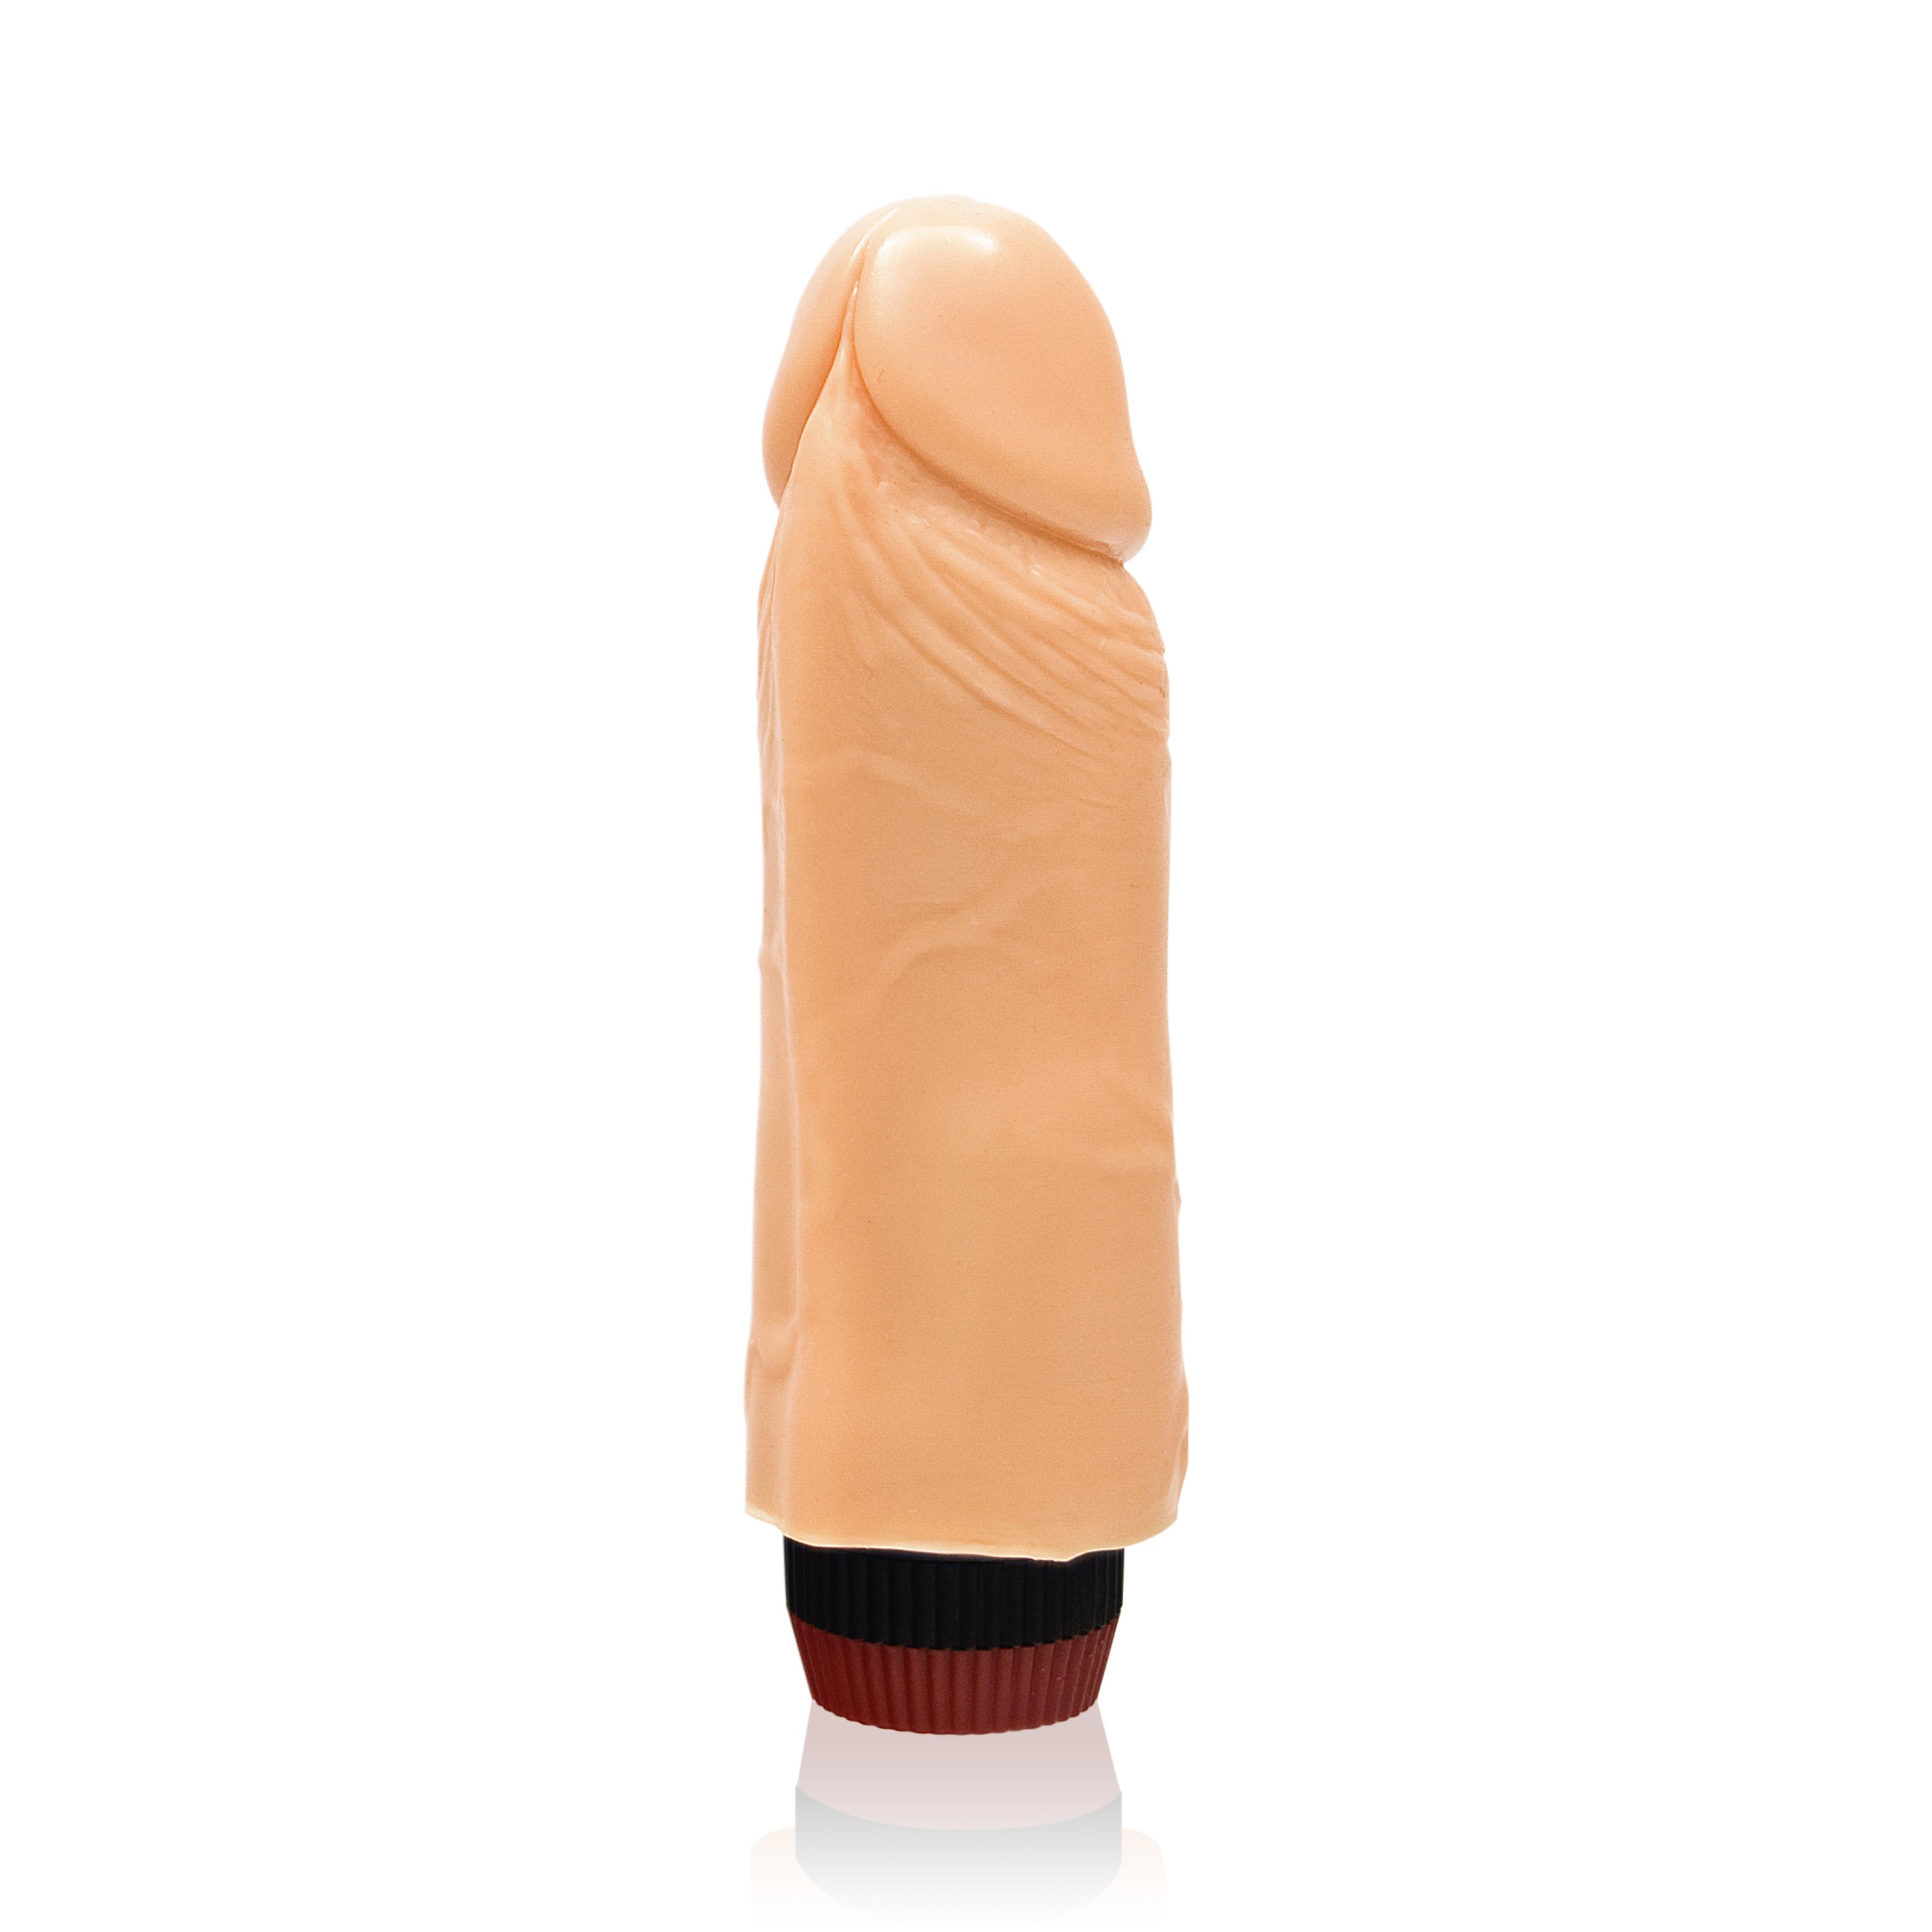 SI IGNITE Cock Dong with Vibration, Flesh, 15 cm